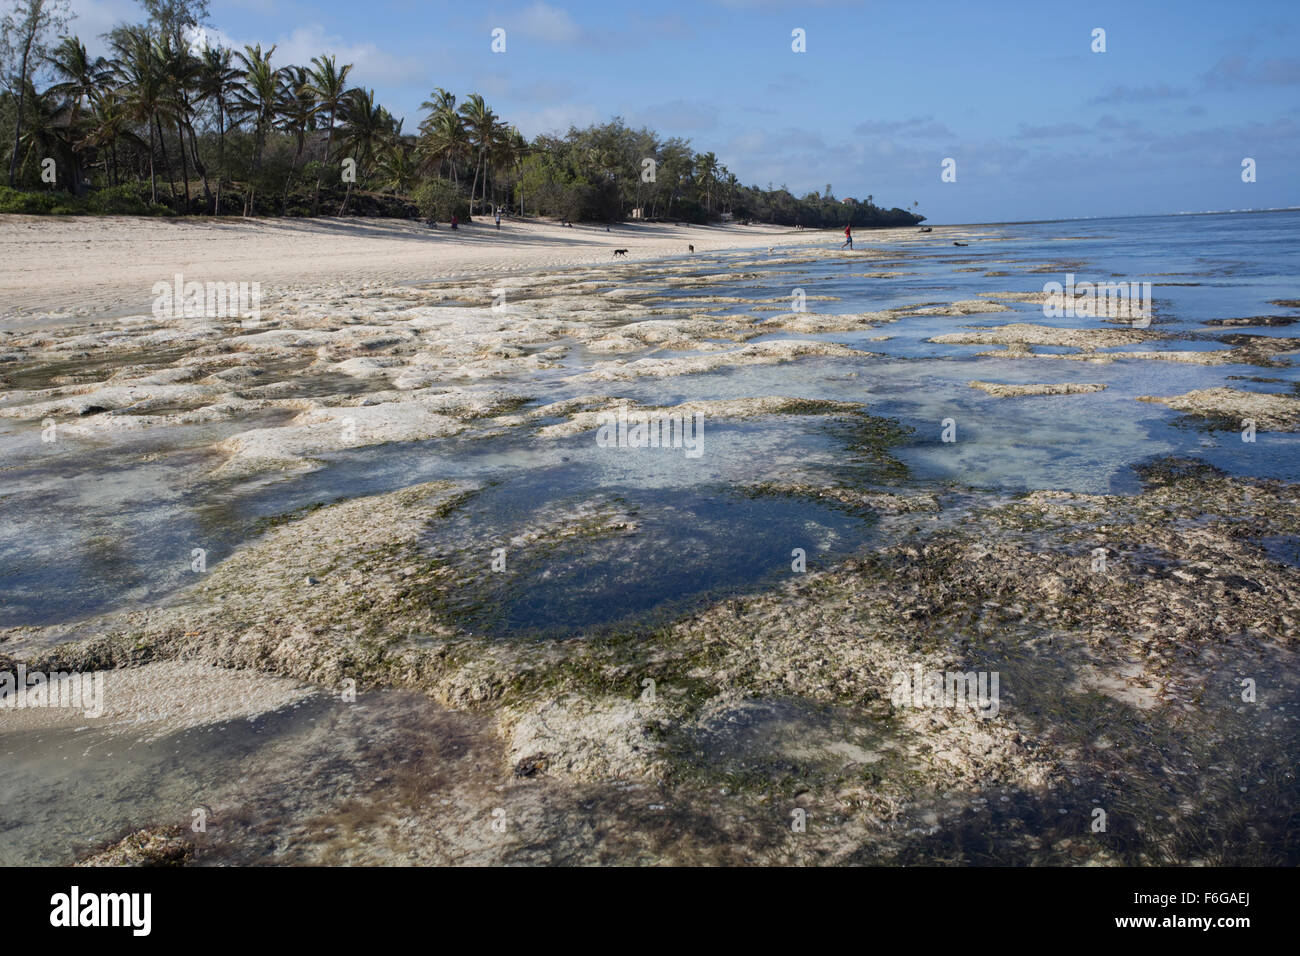 Reef with rock pools at low tide off Mombasa Kenya Stock Photo